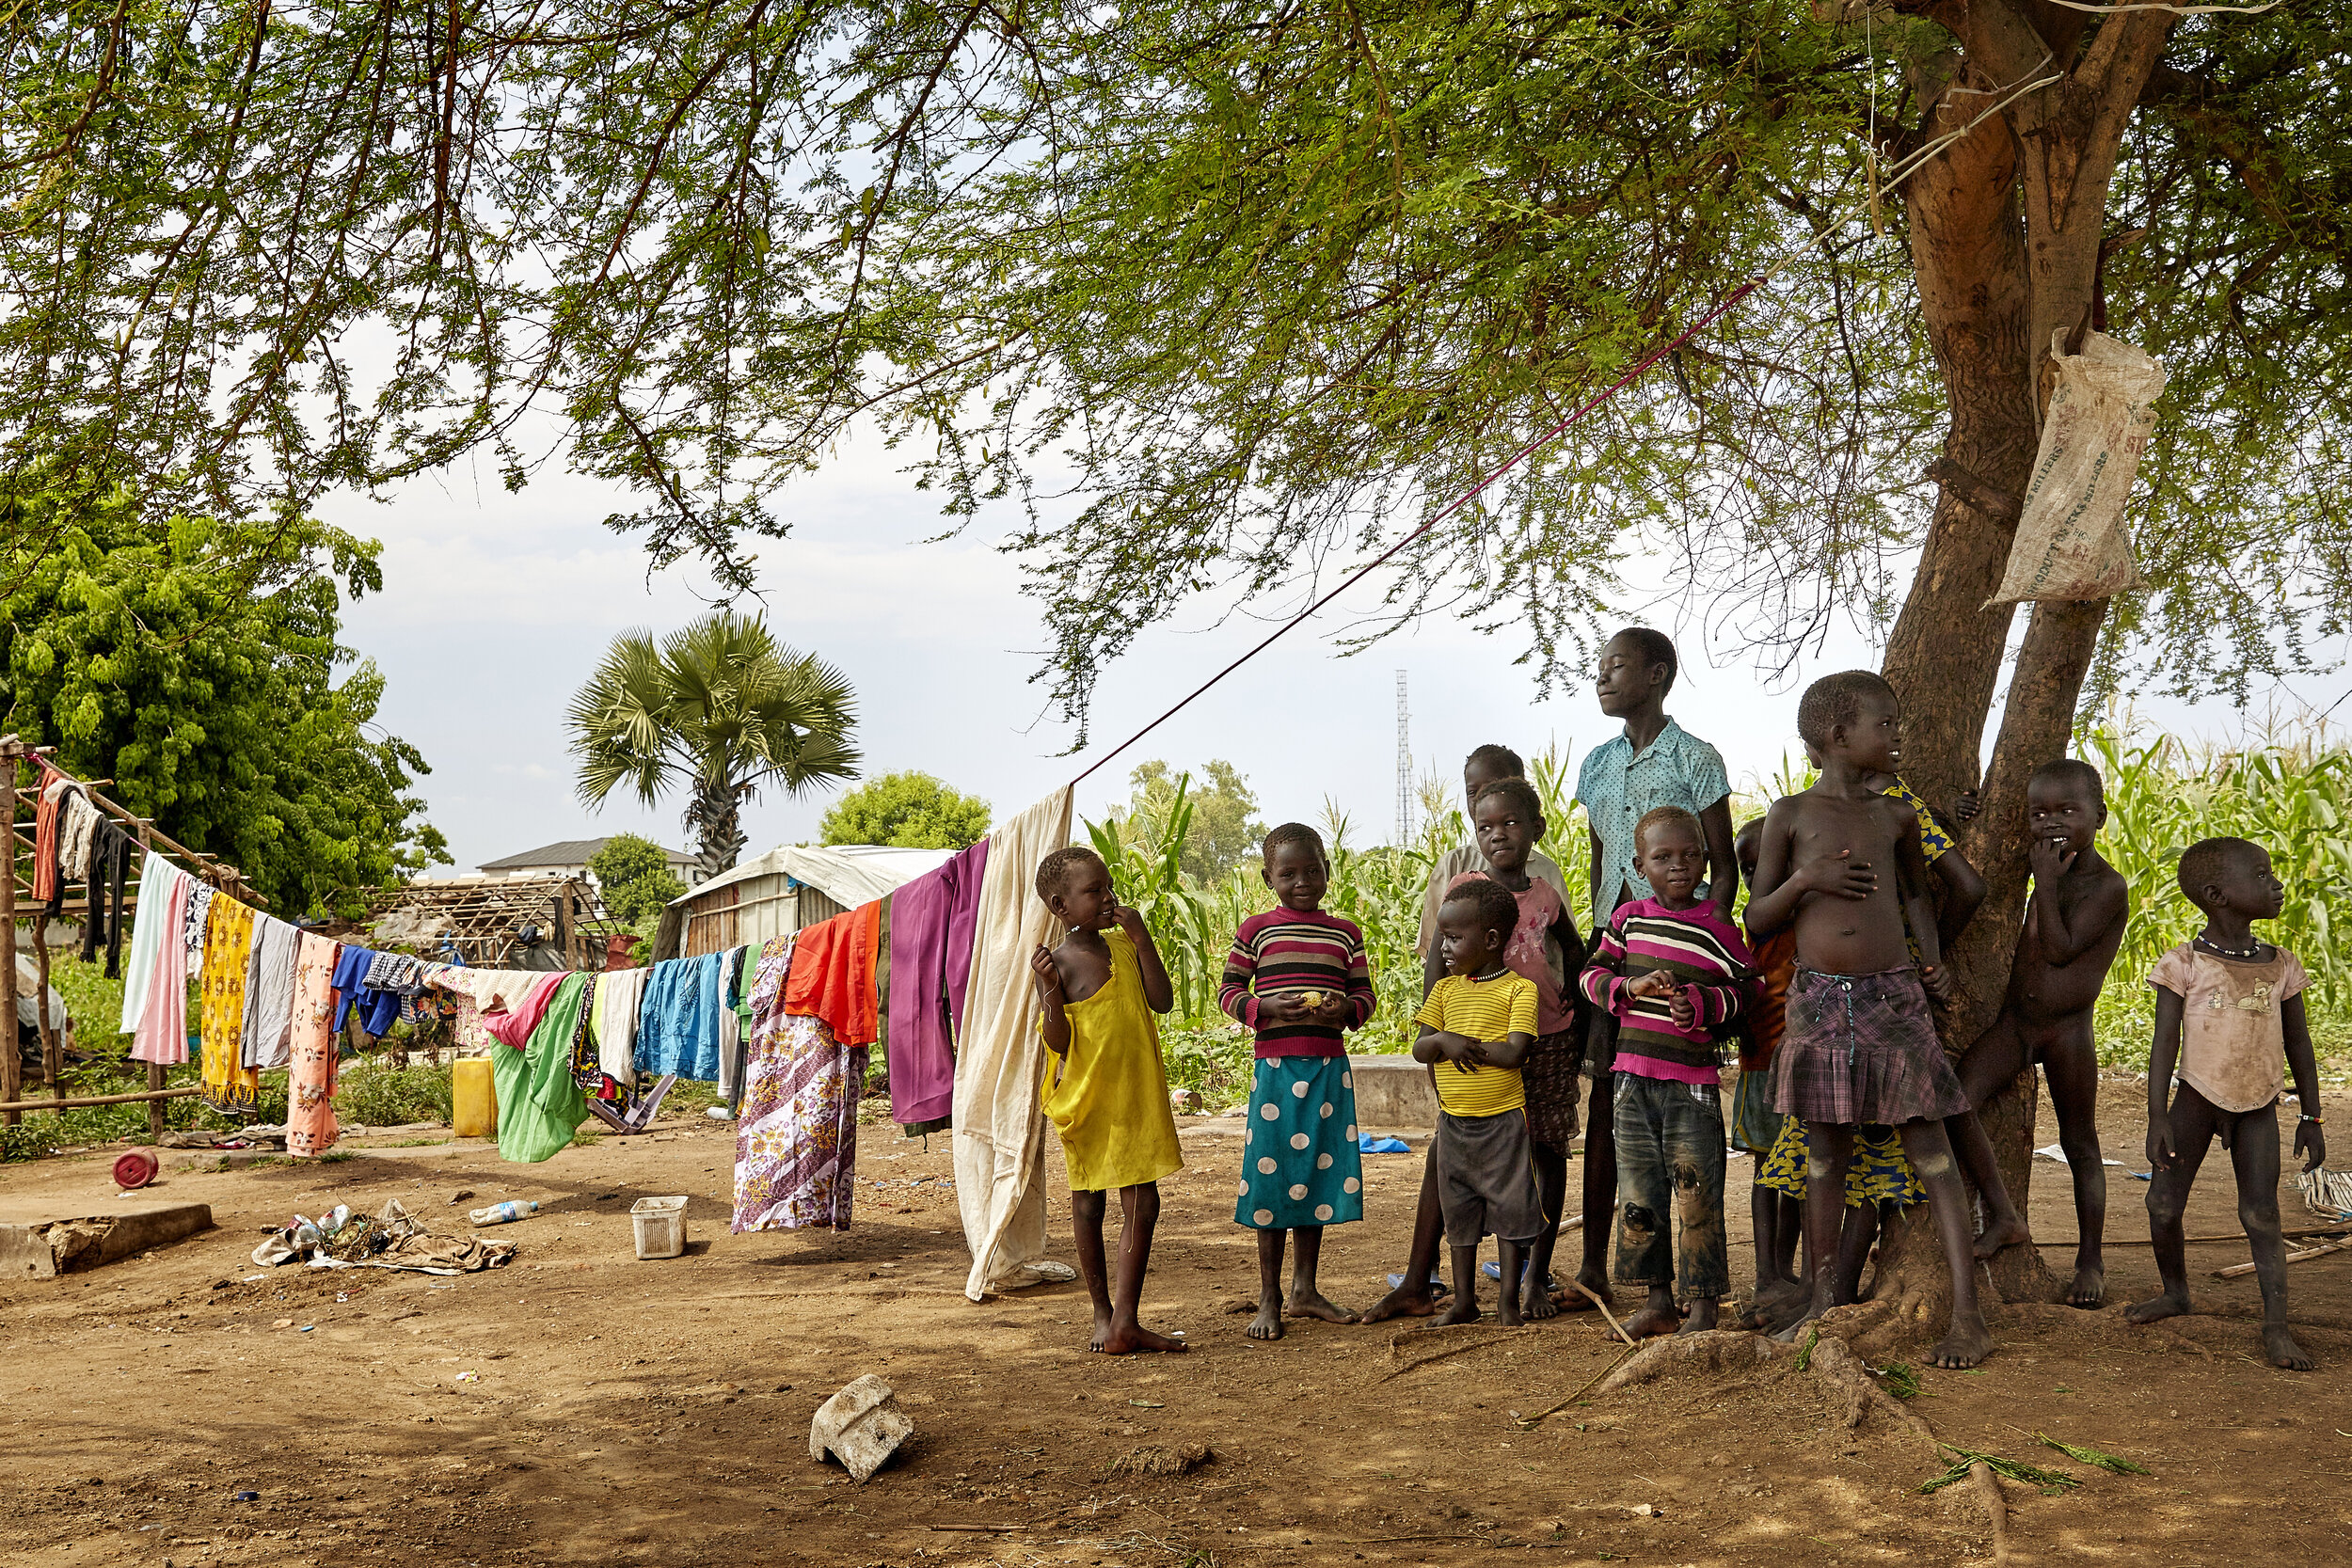 Children living in an unofficial refugee camp in Juba, South Sudan